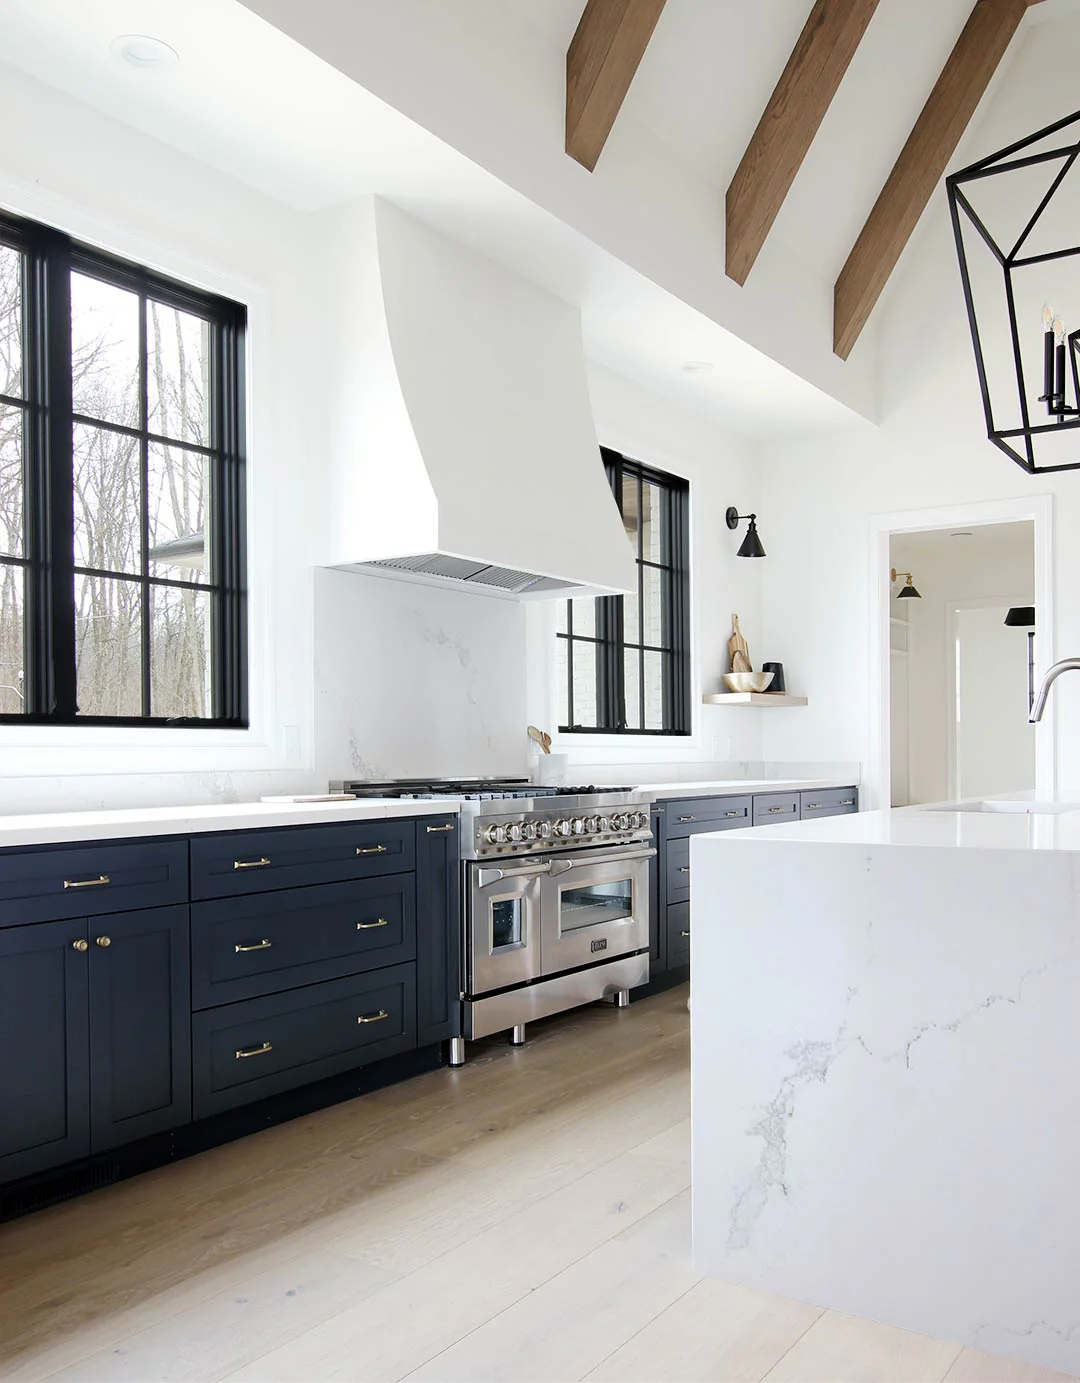 An oven range hood surrounded in plaster in a white marble and navy themed kitchen.